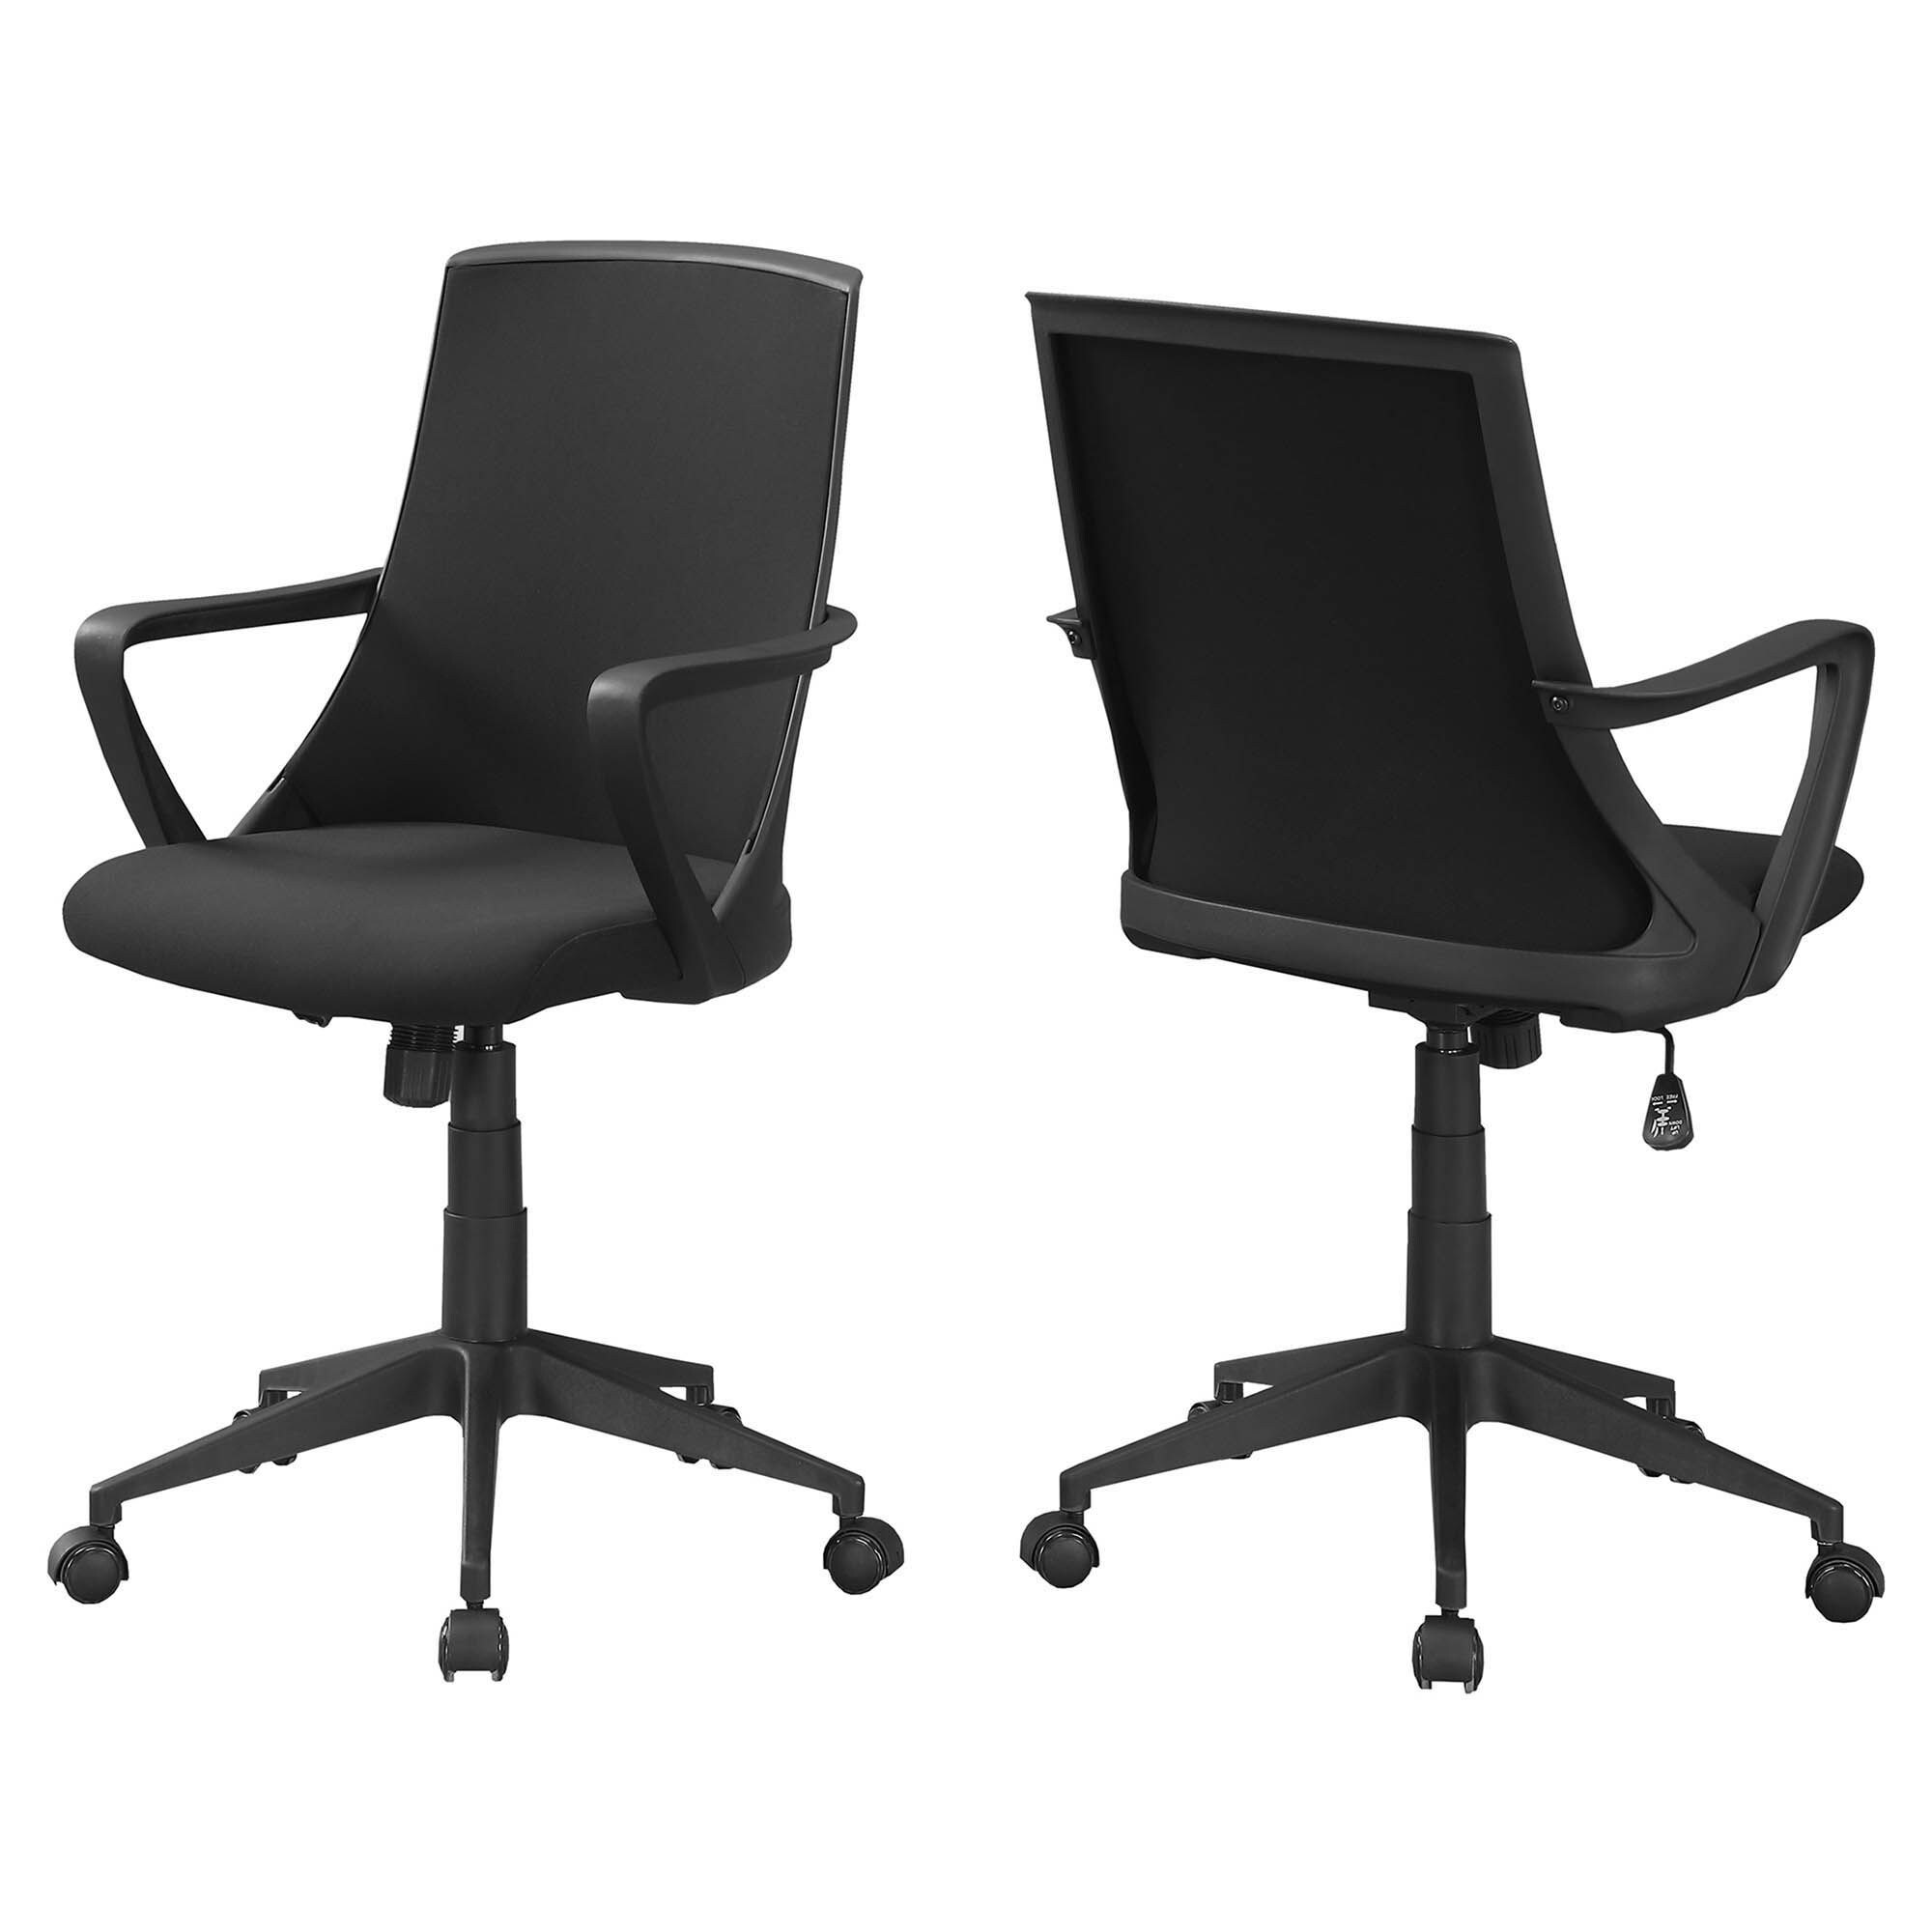 Offex 22.5"L Contemporary Mid-Back Swivel Office Chair - Black - 22.5"x 24"x 37"